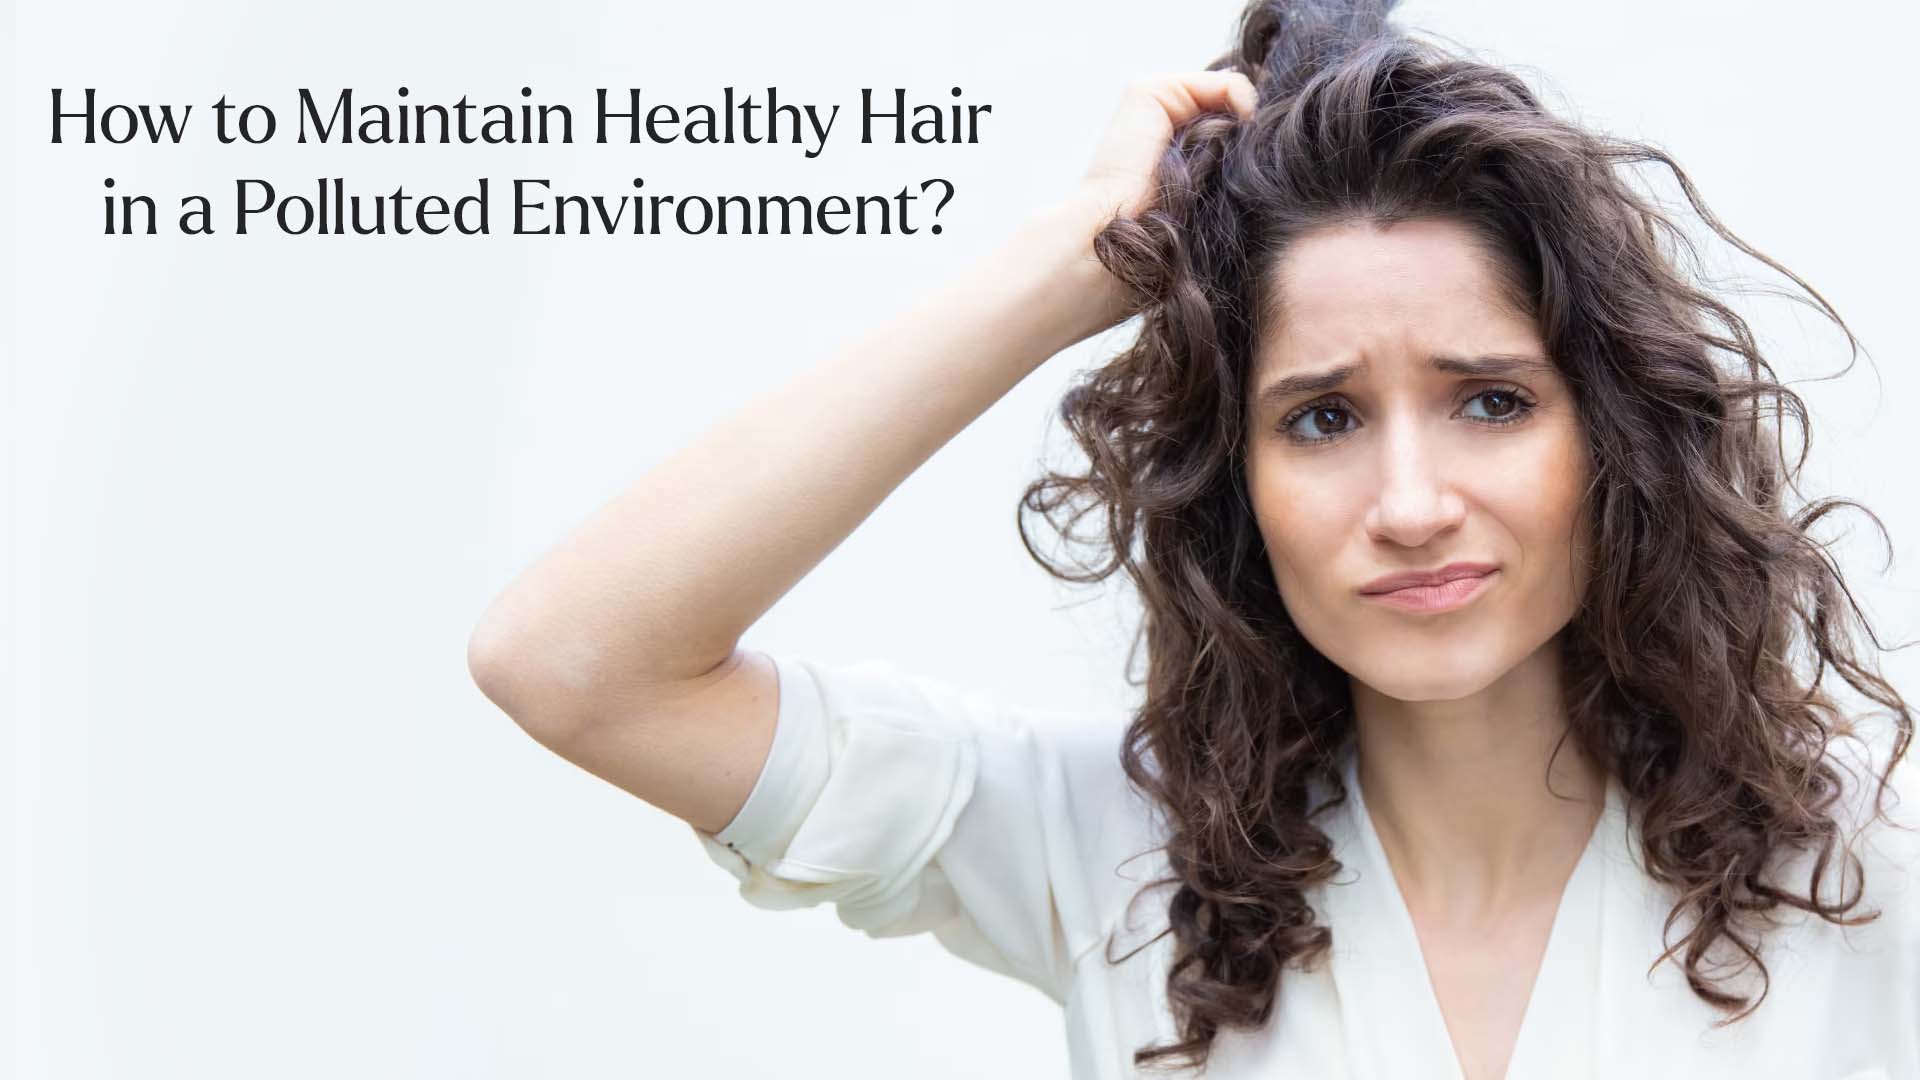 How to Maintain Healthy Hair in a Polluted Environment: Essential Tips and Tricks